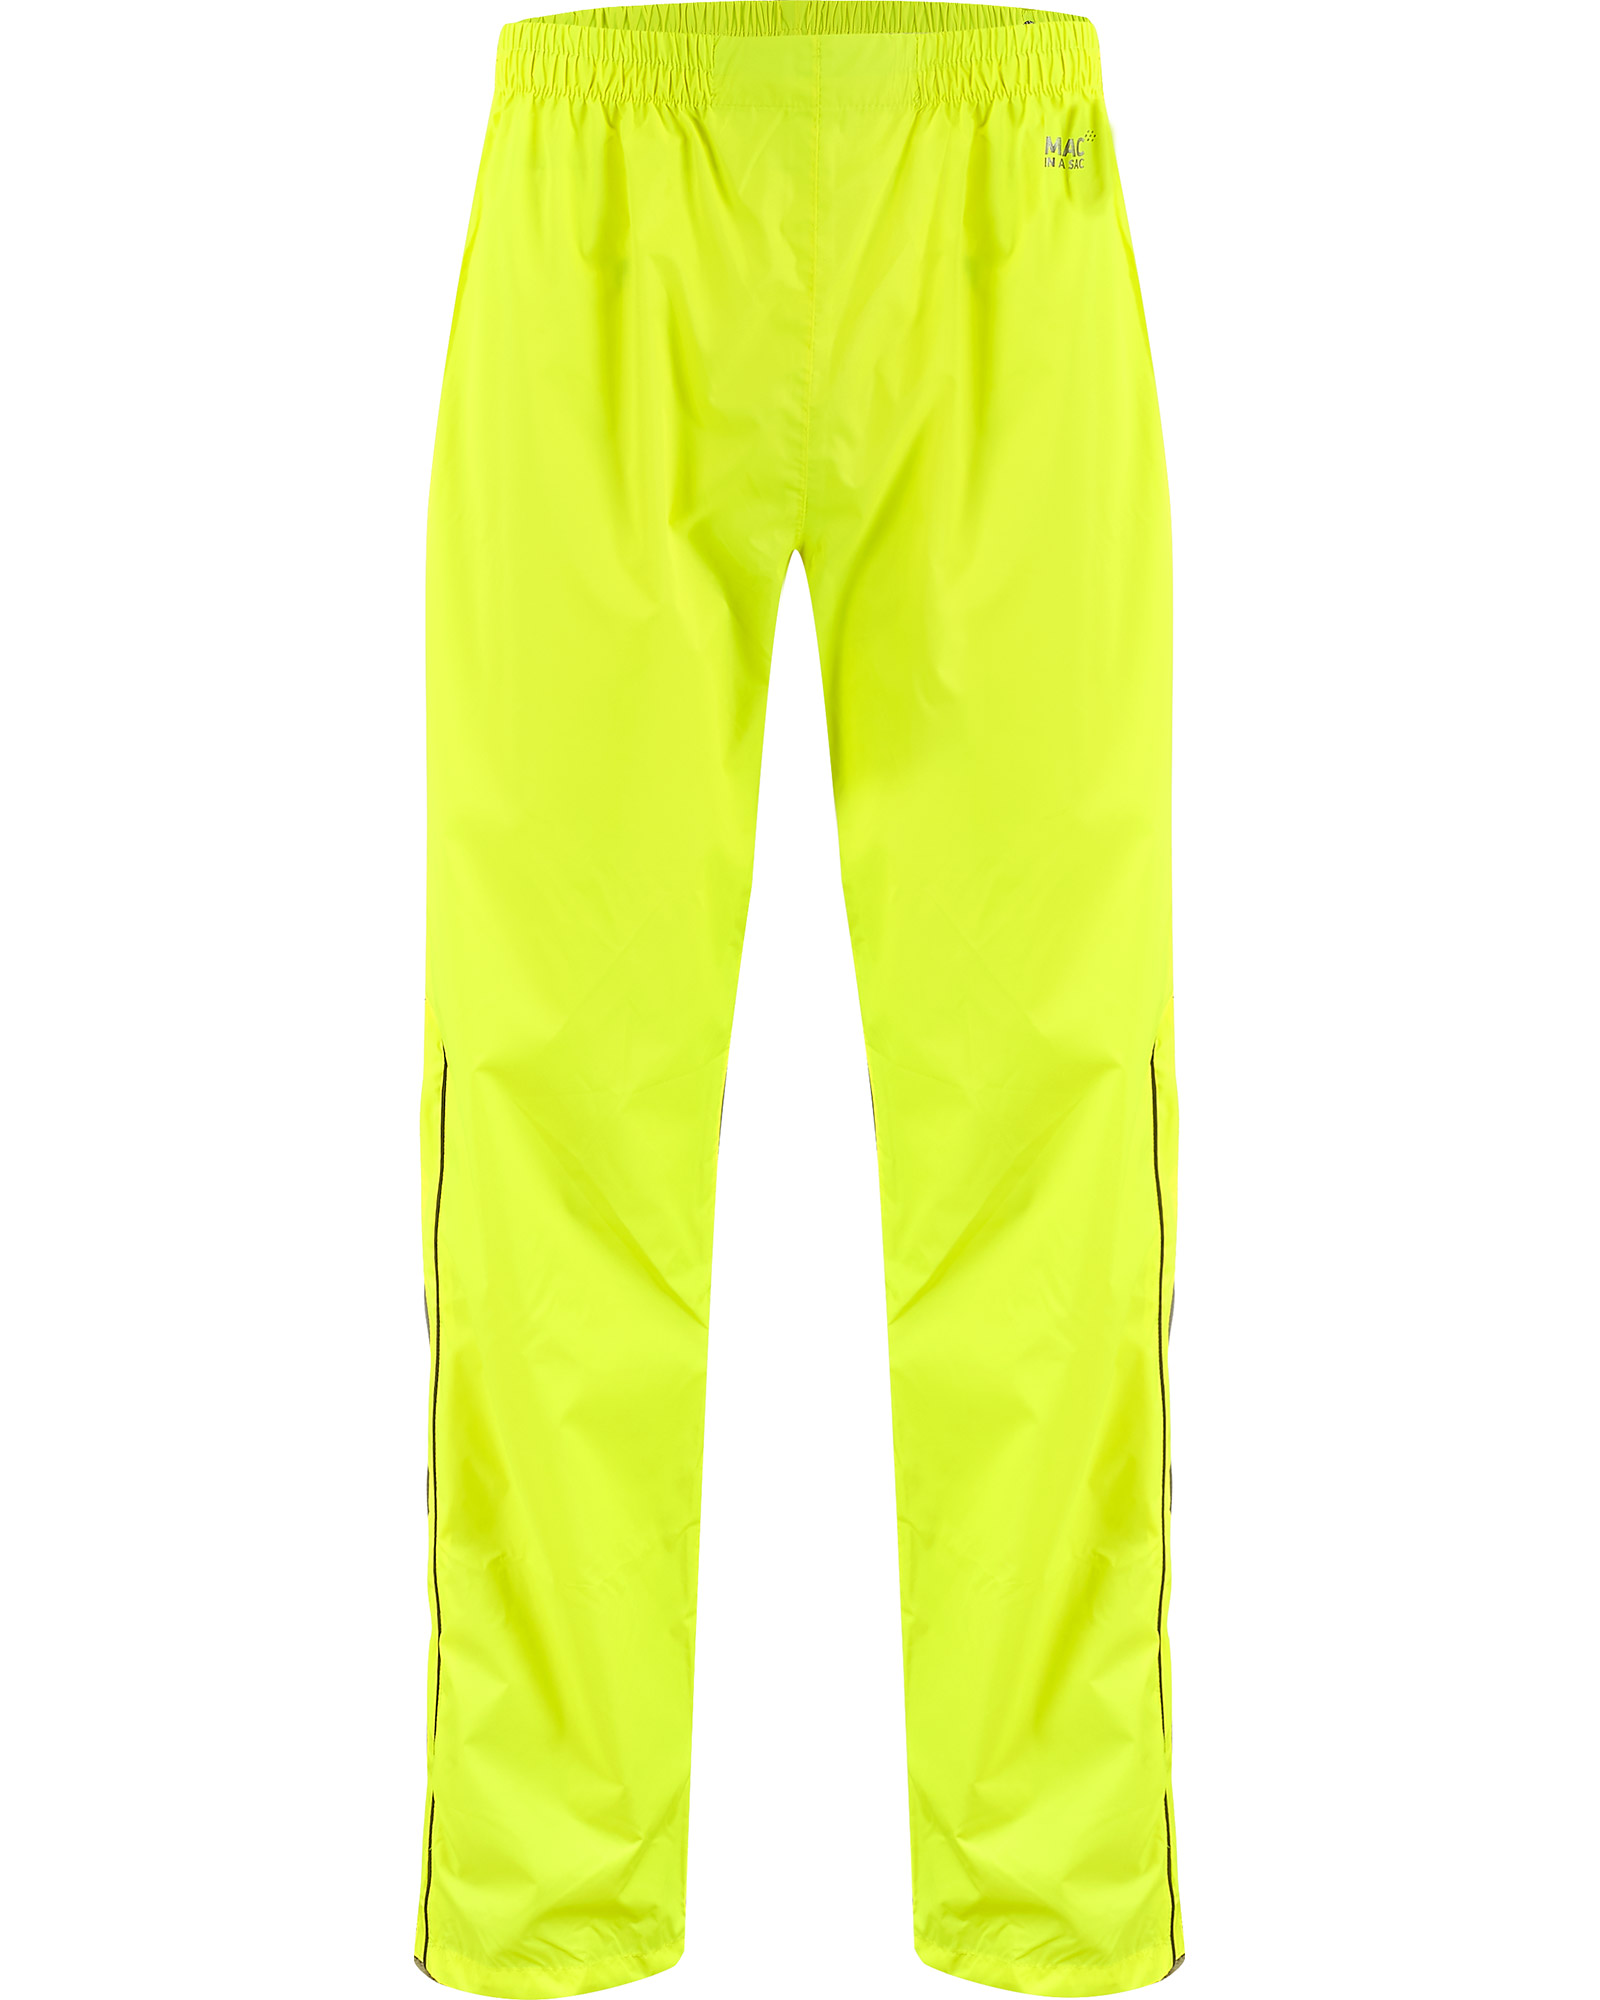 Target Dry Mac in a Sac Adult Full Zip Packable Waterproof Overtrousers - Neon Yellow M